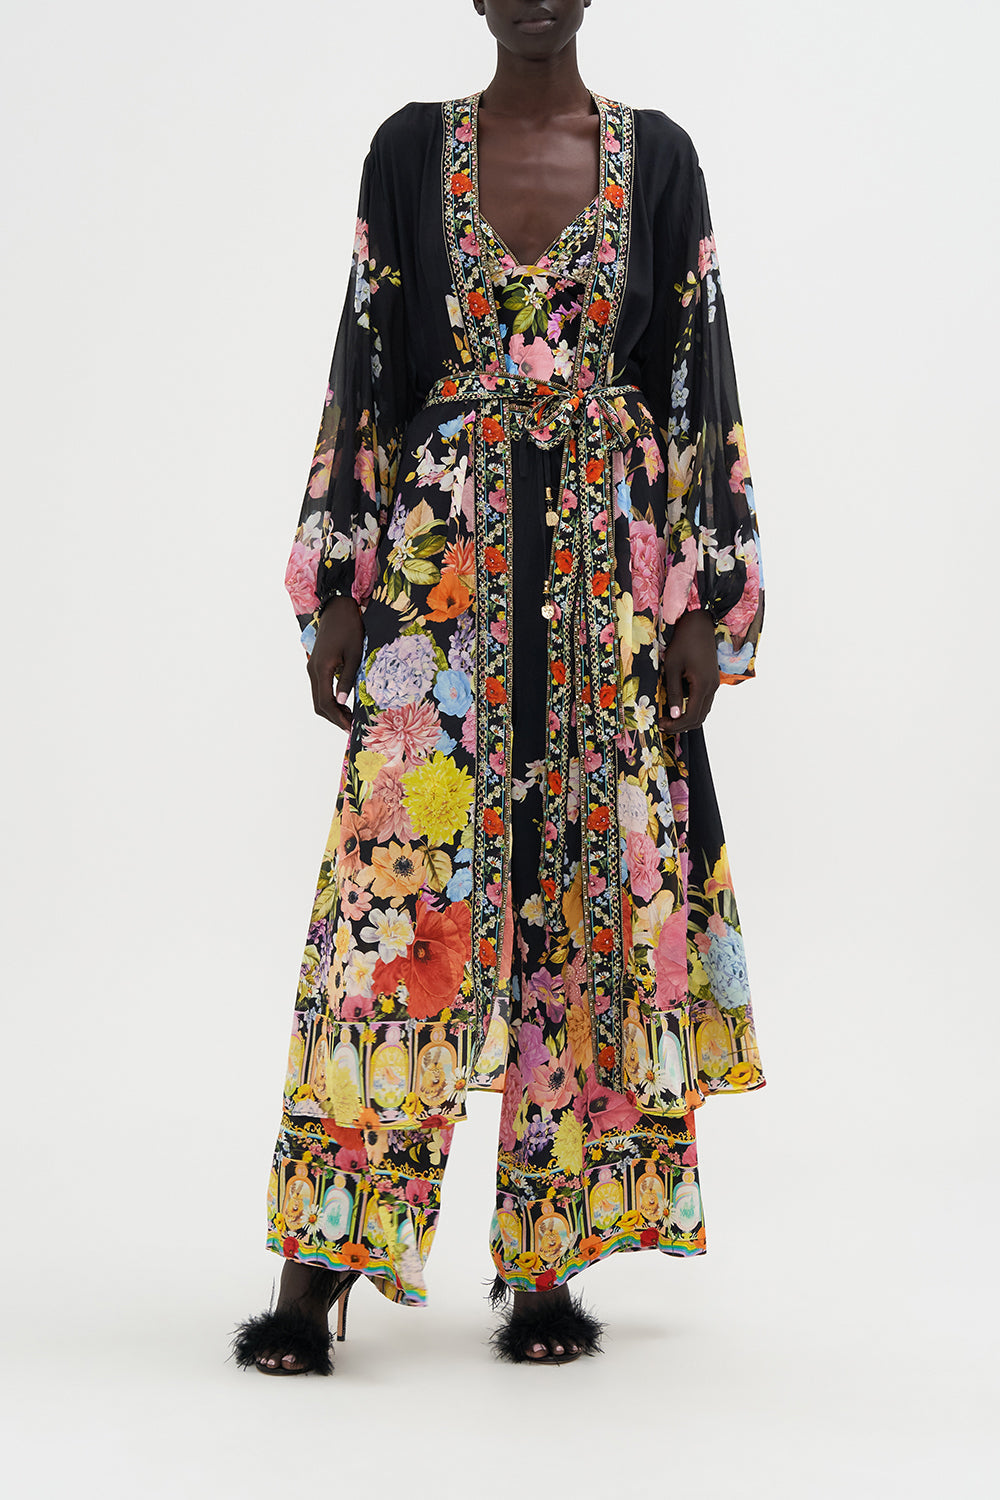 Blouson Sleeve Layer Divine Divinity print by CAMILLA